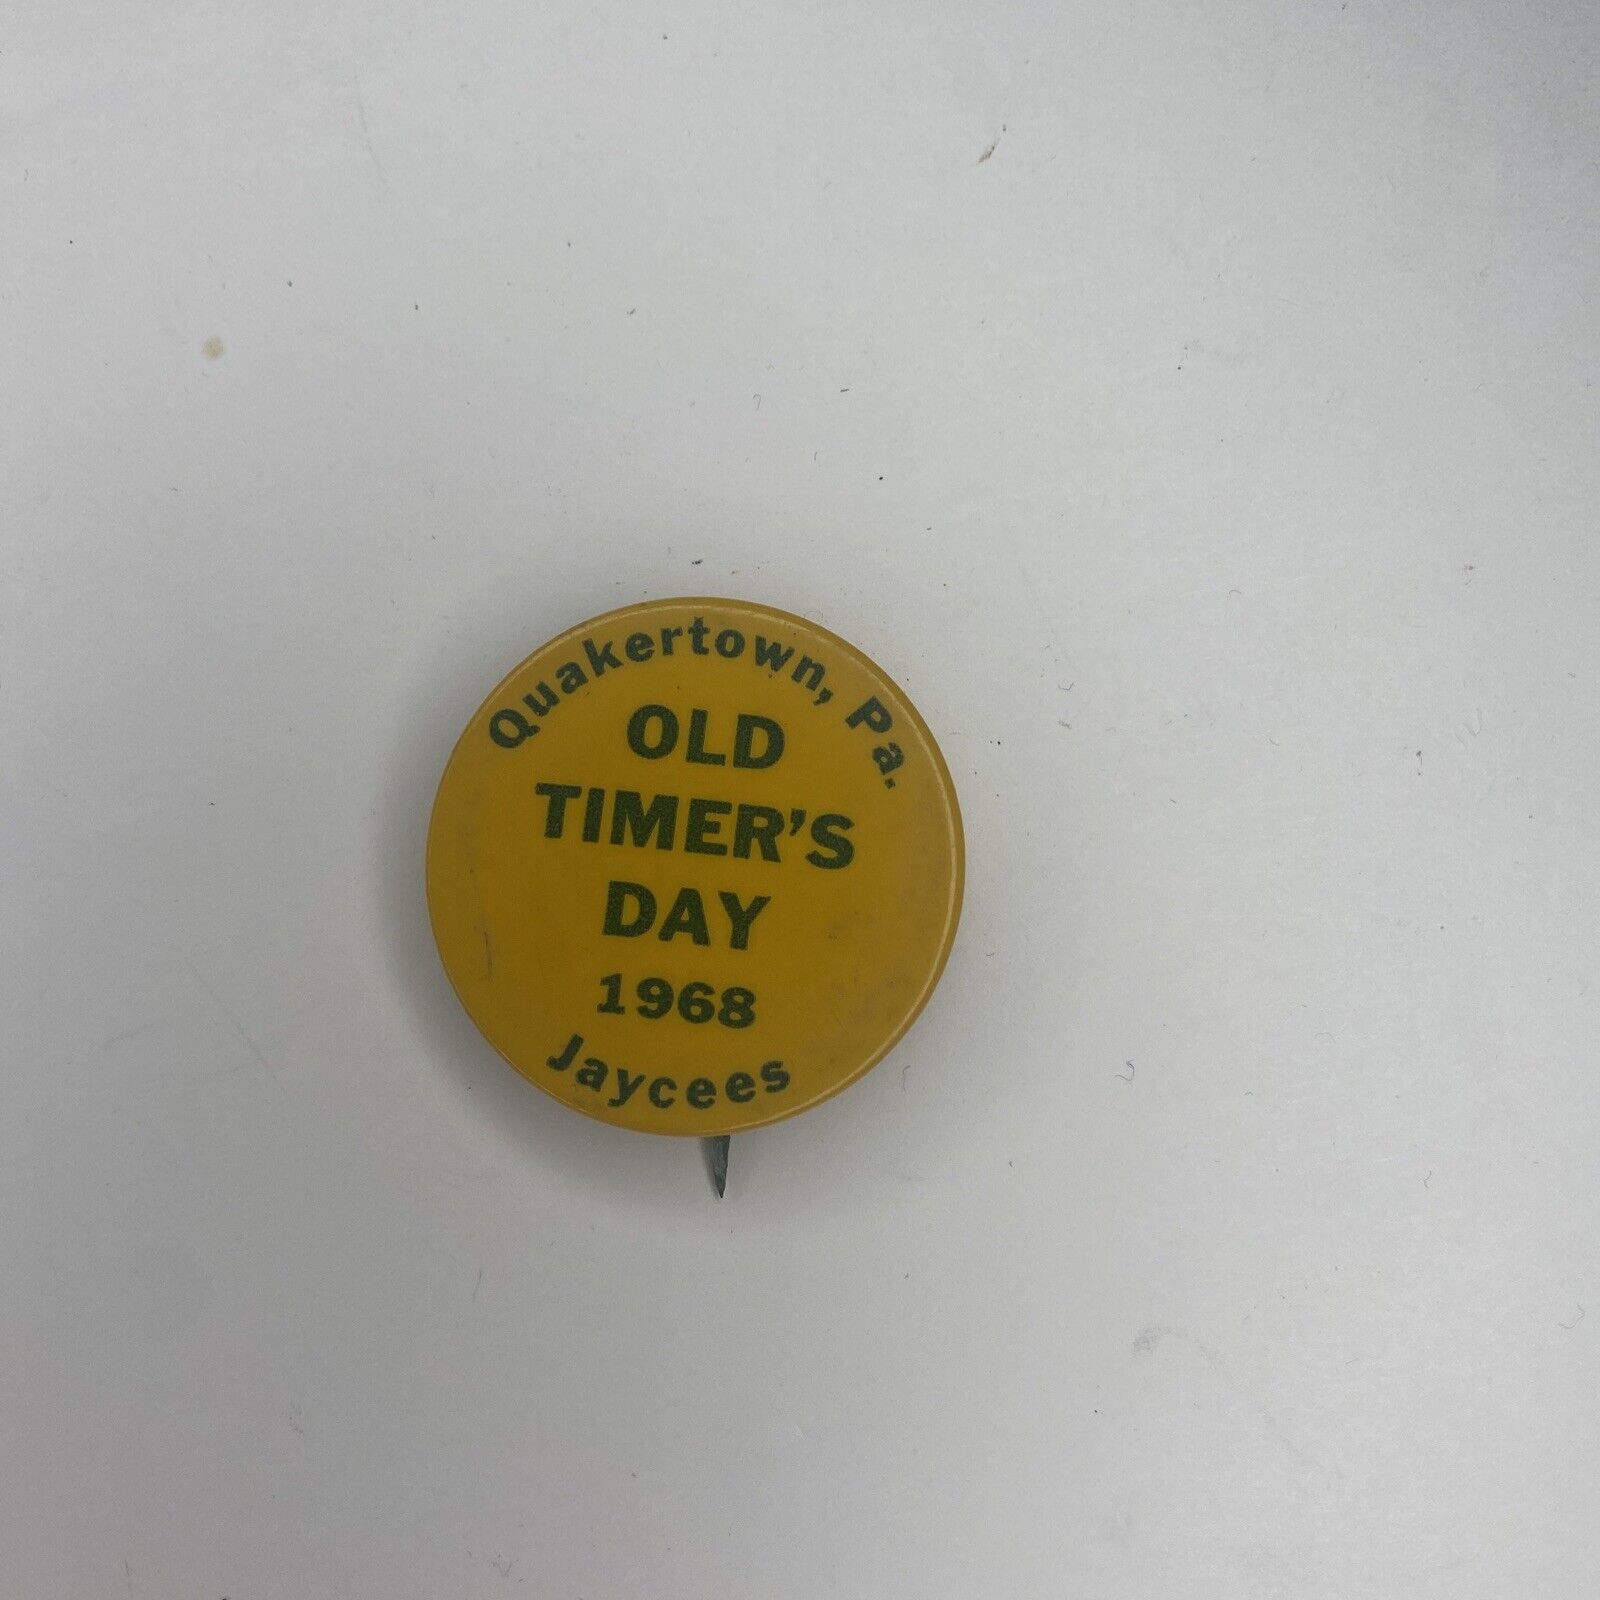 Vintage Old Timers Day 1968 Quakertown Pennsylvania Pin Button Jaycees